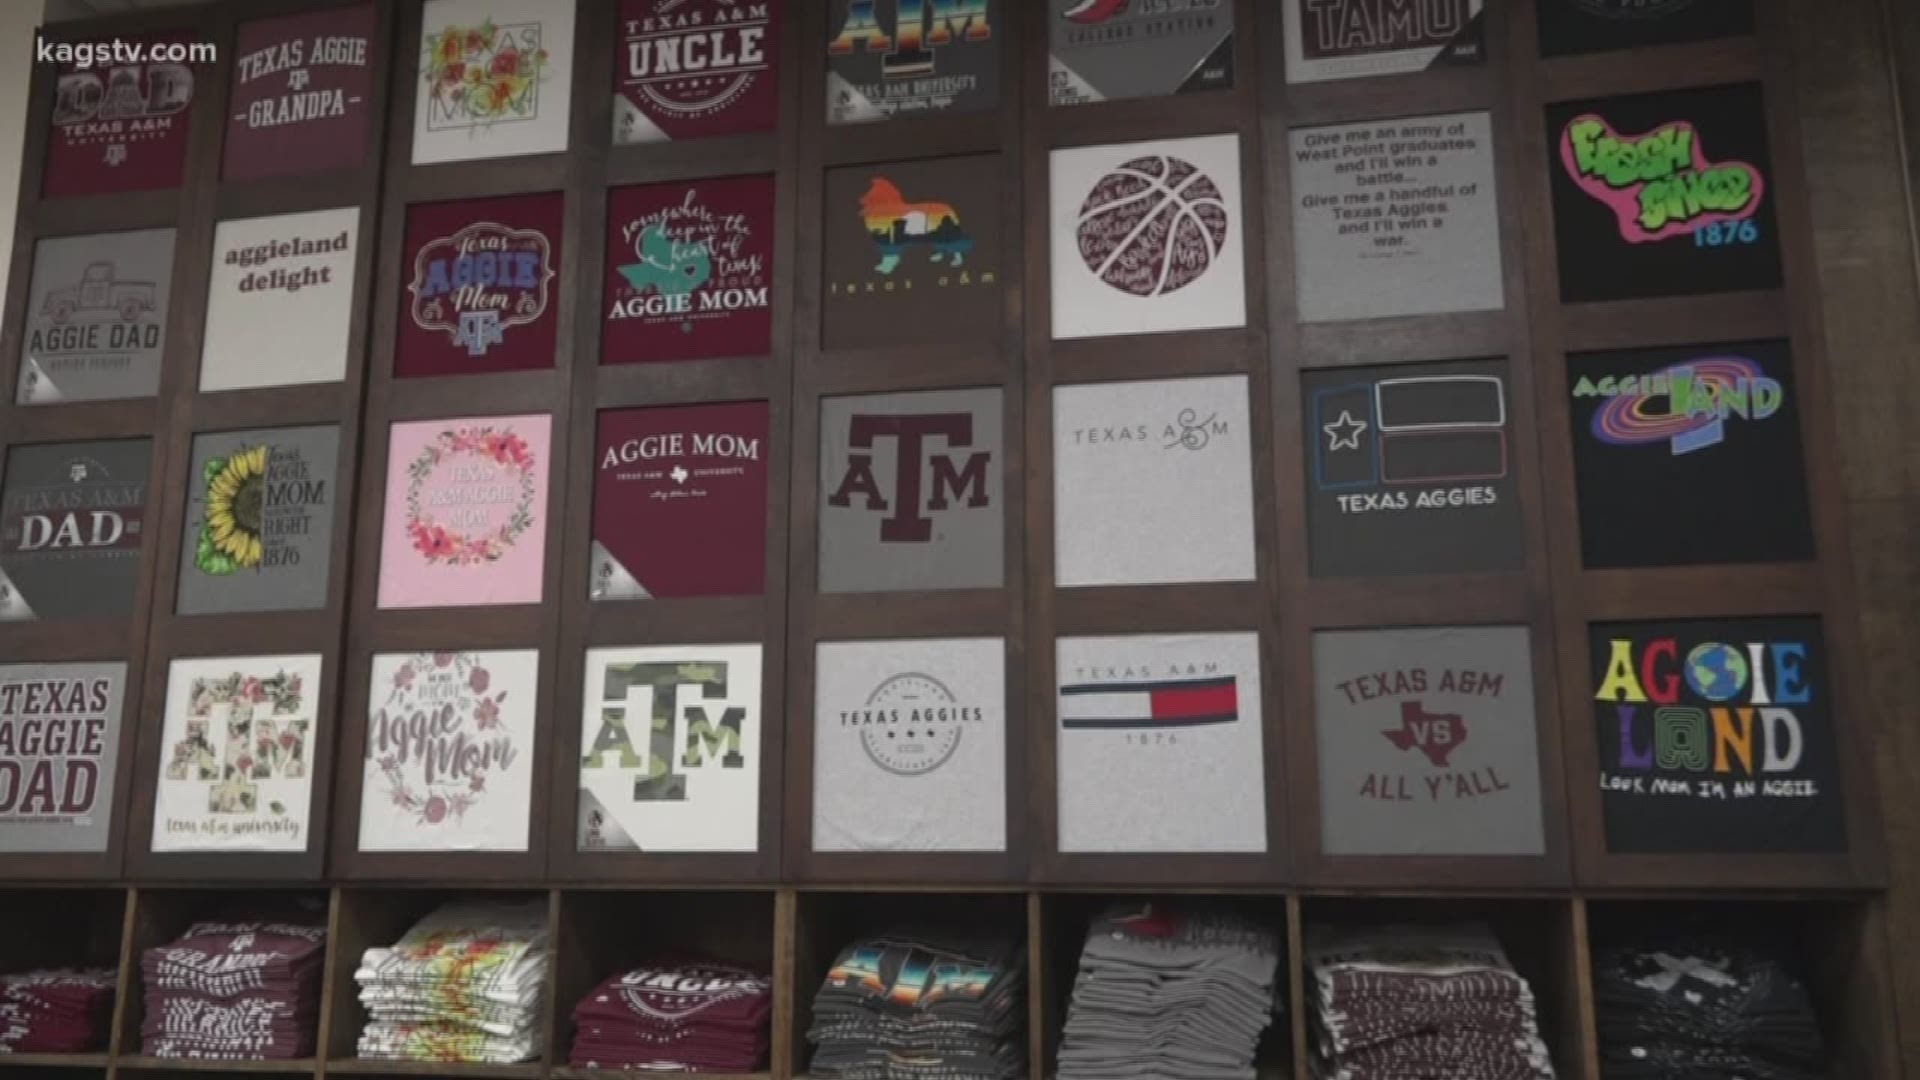 Aggieland Outfitters owner Fadi Kalaouze understands the tuition struggle. How he built his into his life's work and how he wants to help other Aggies do the same.